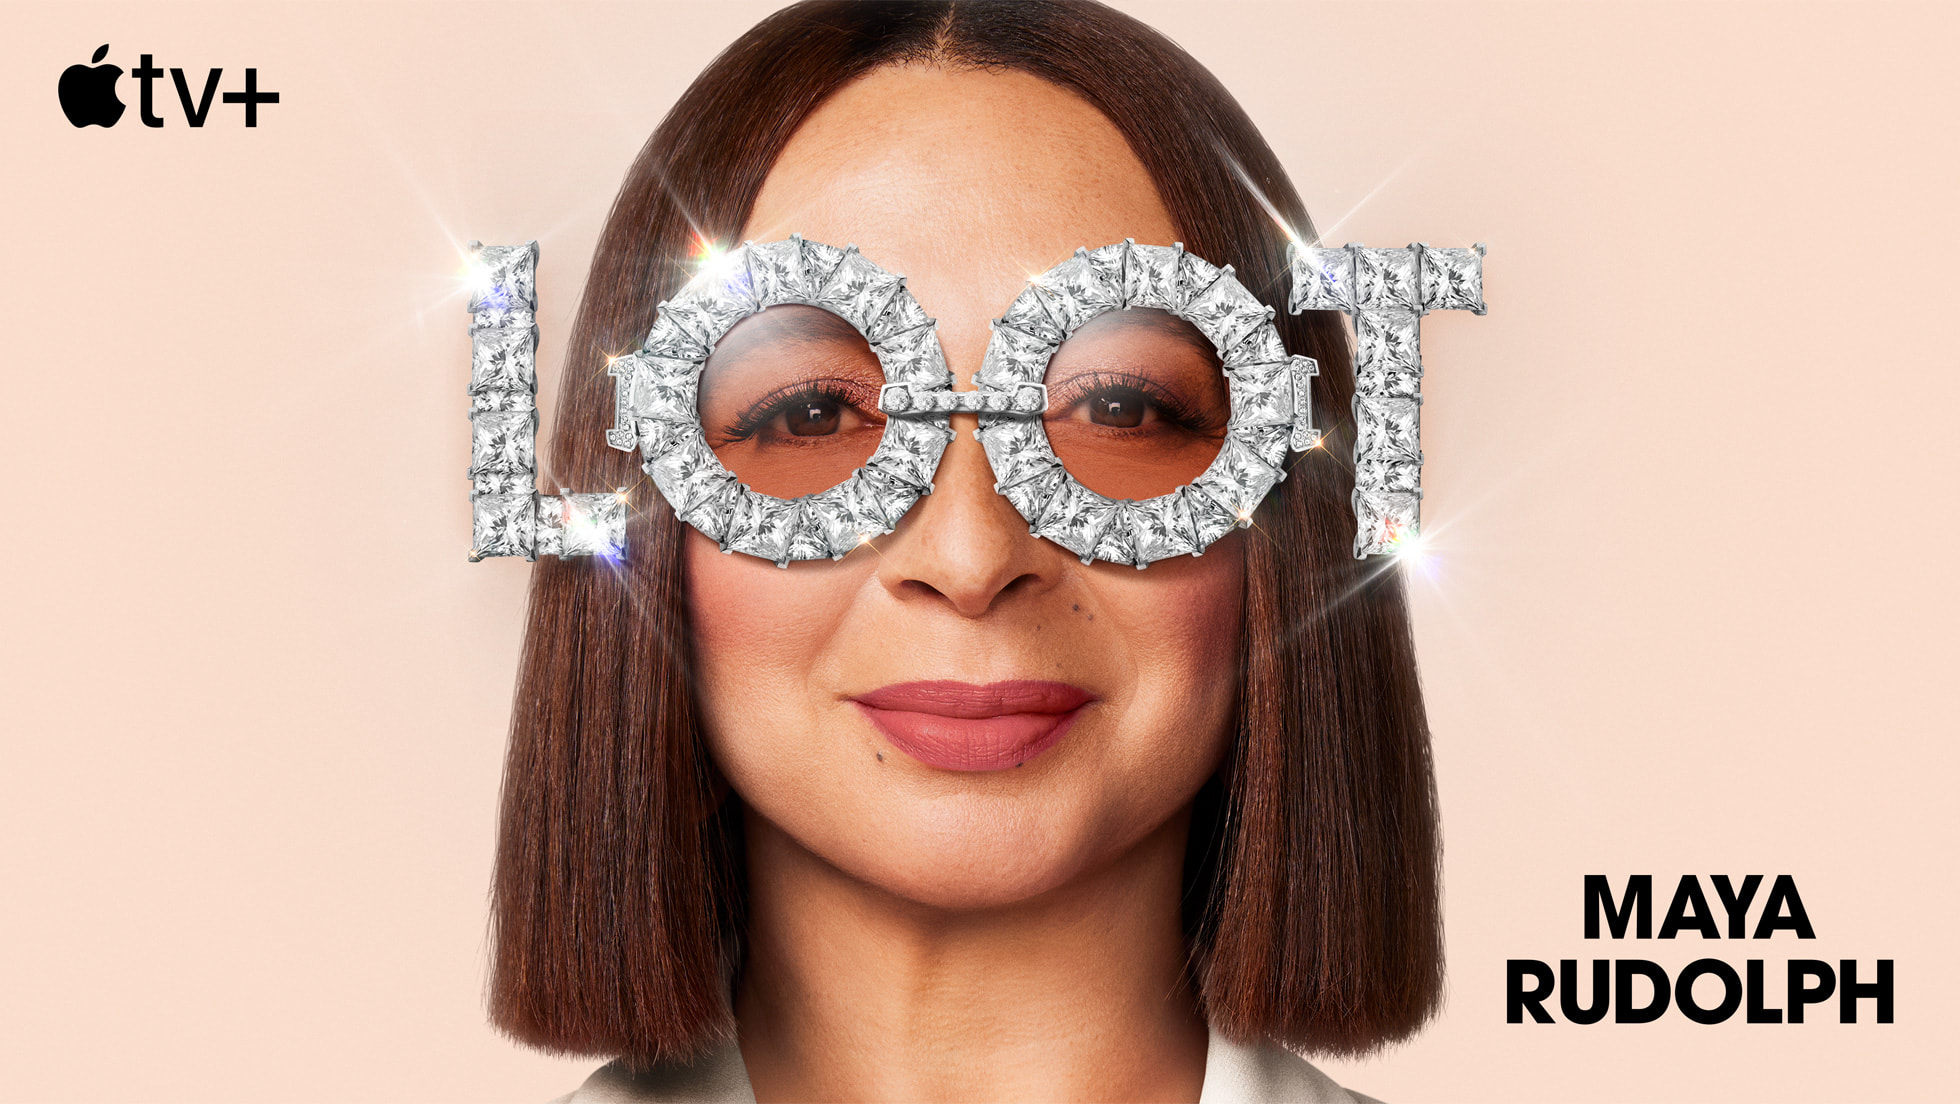 “Loot” starring and executive produced by five-time Emmy Award winner Maya Rudolph season three